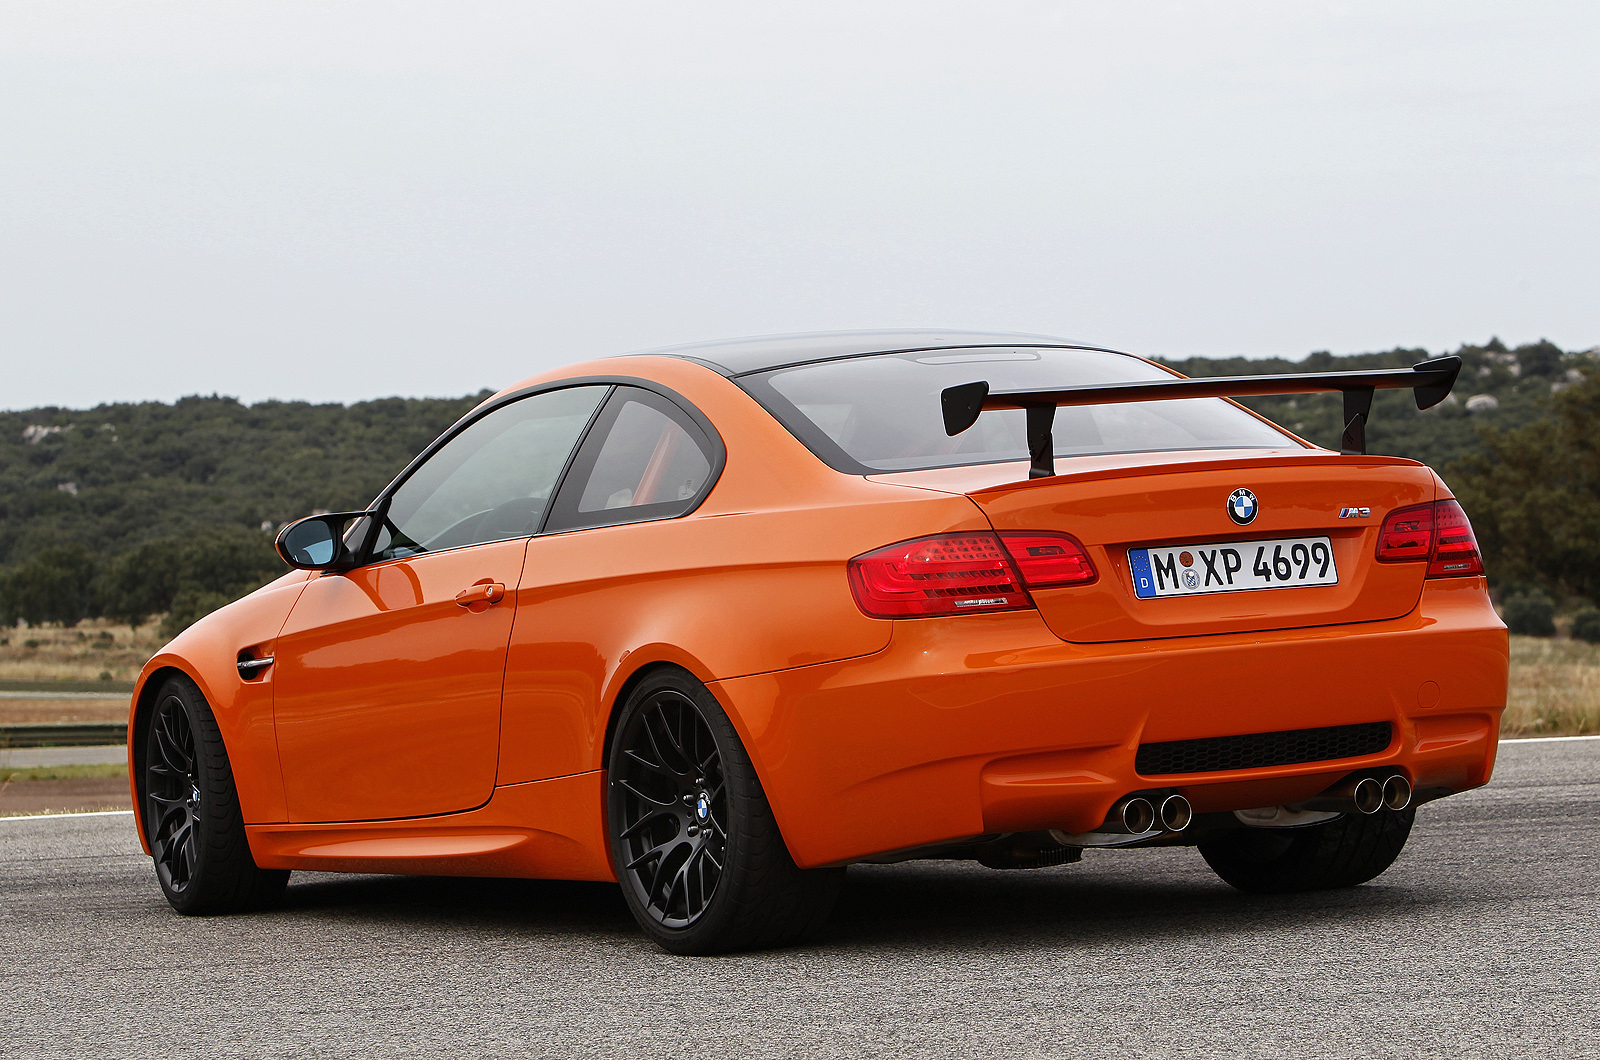 Bmw m3 cost in india #5